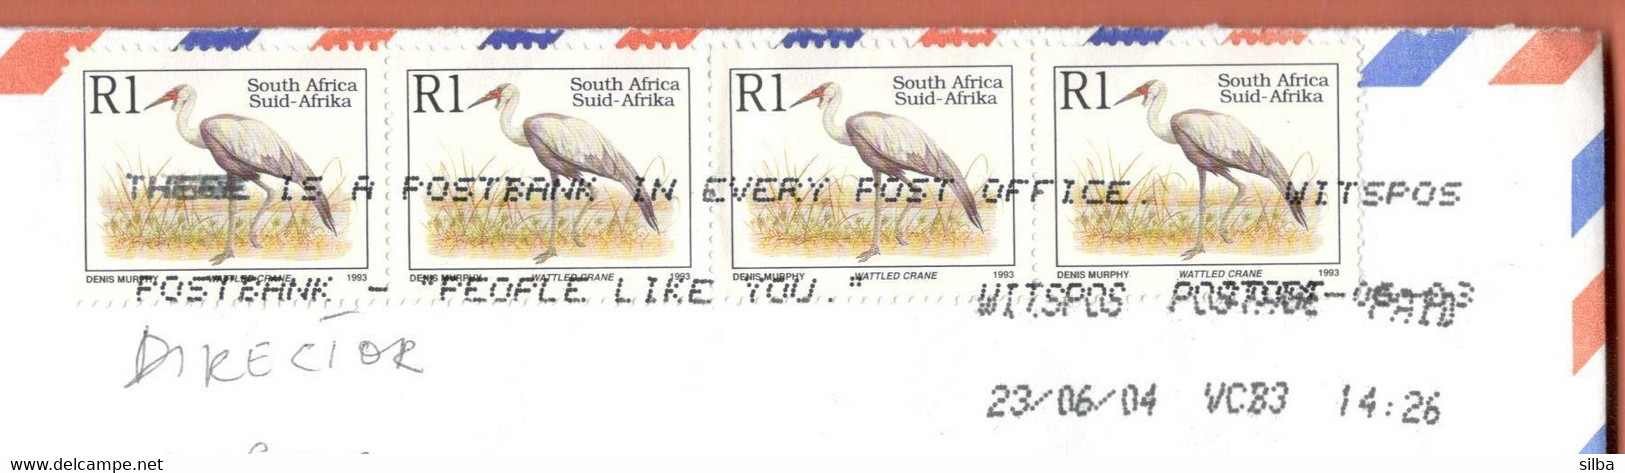 South Africa Witspos 2004 / There Is A Postbank In Every Post Office / Machine Stamp Slogan / Bird Wattled Crane 1993 - Lettres & Documents